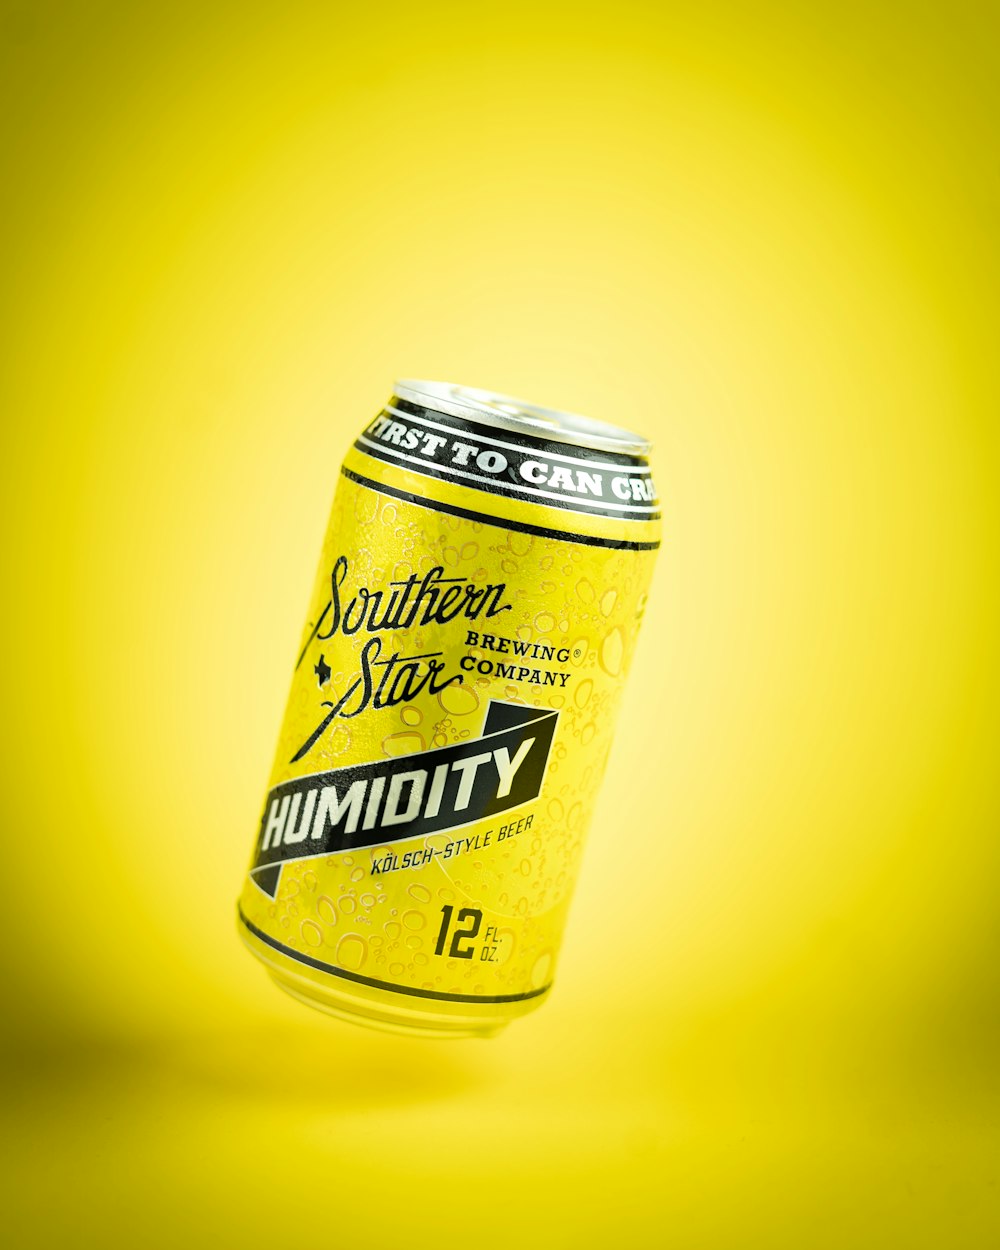 Southern Star Humidity can